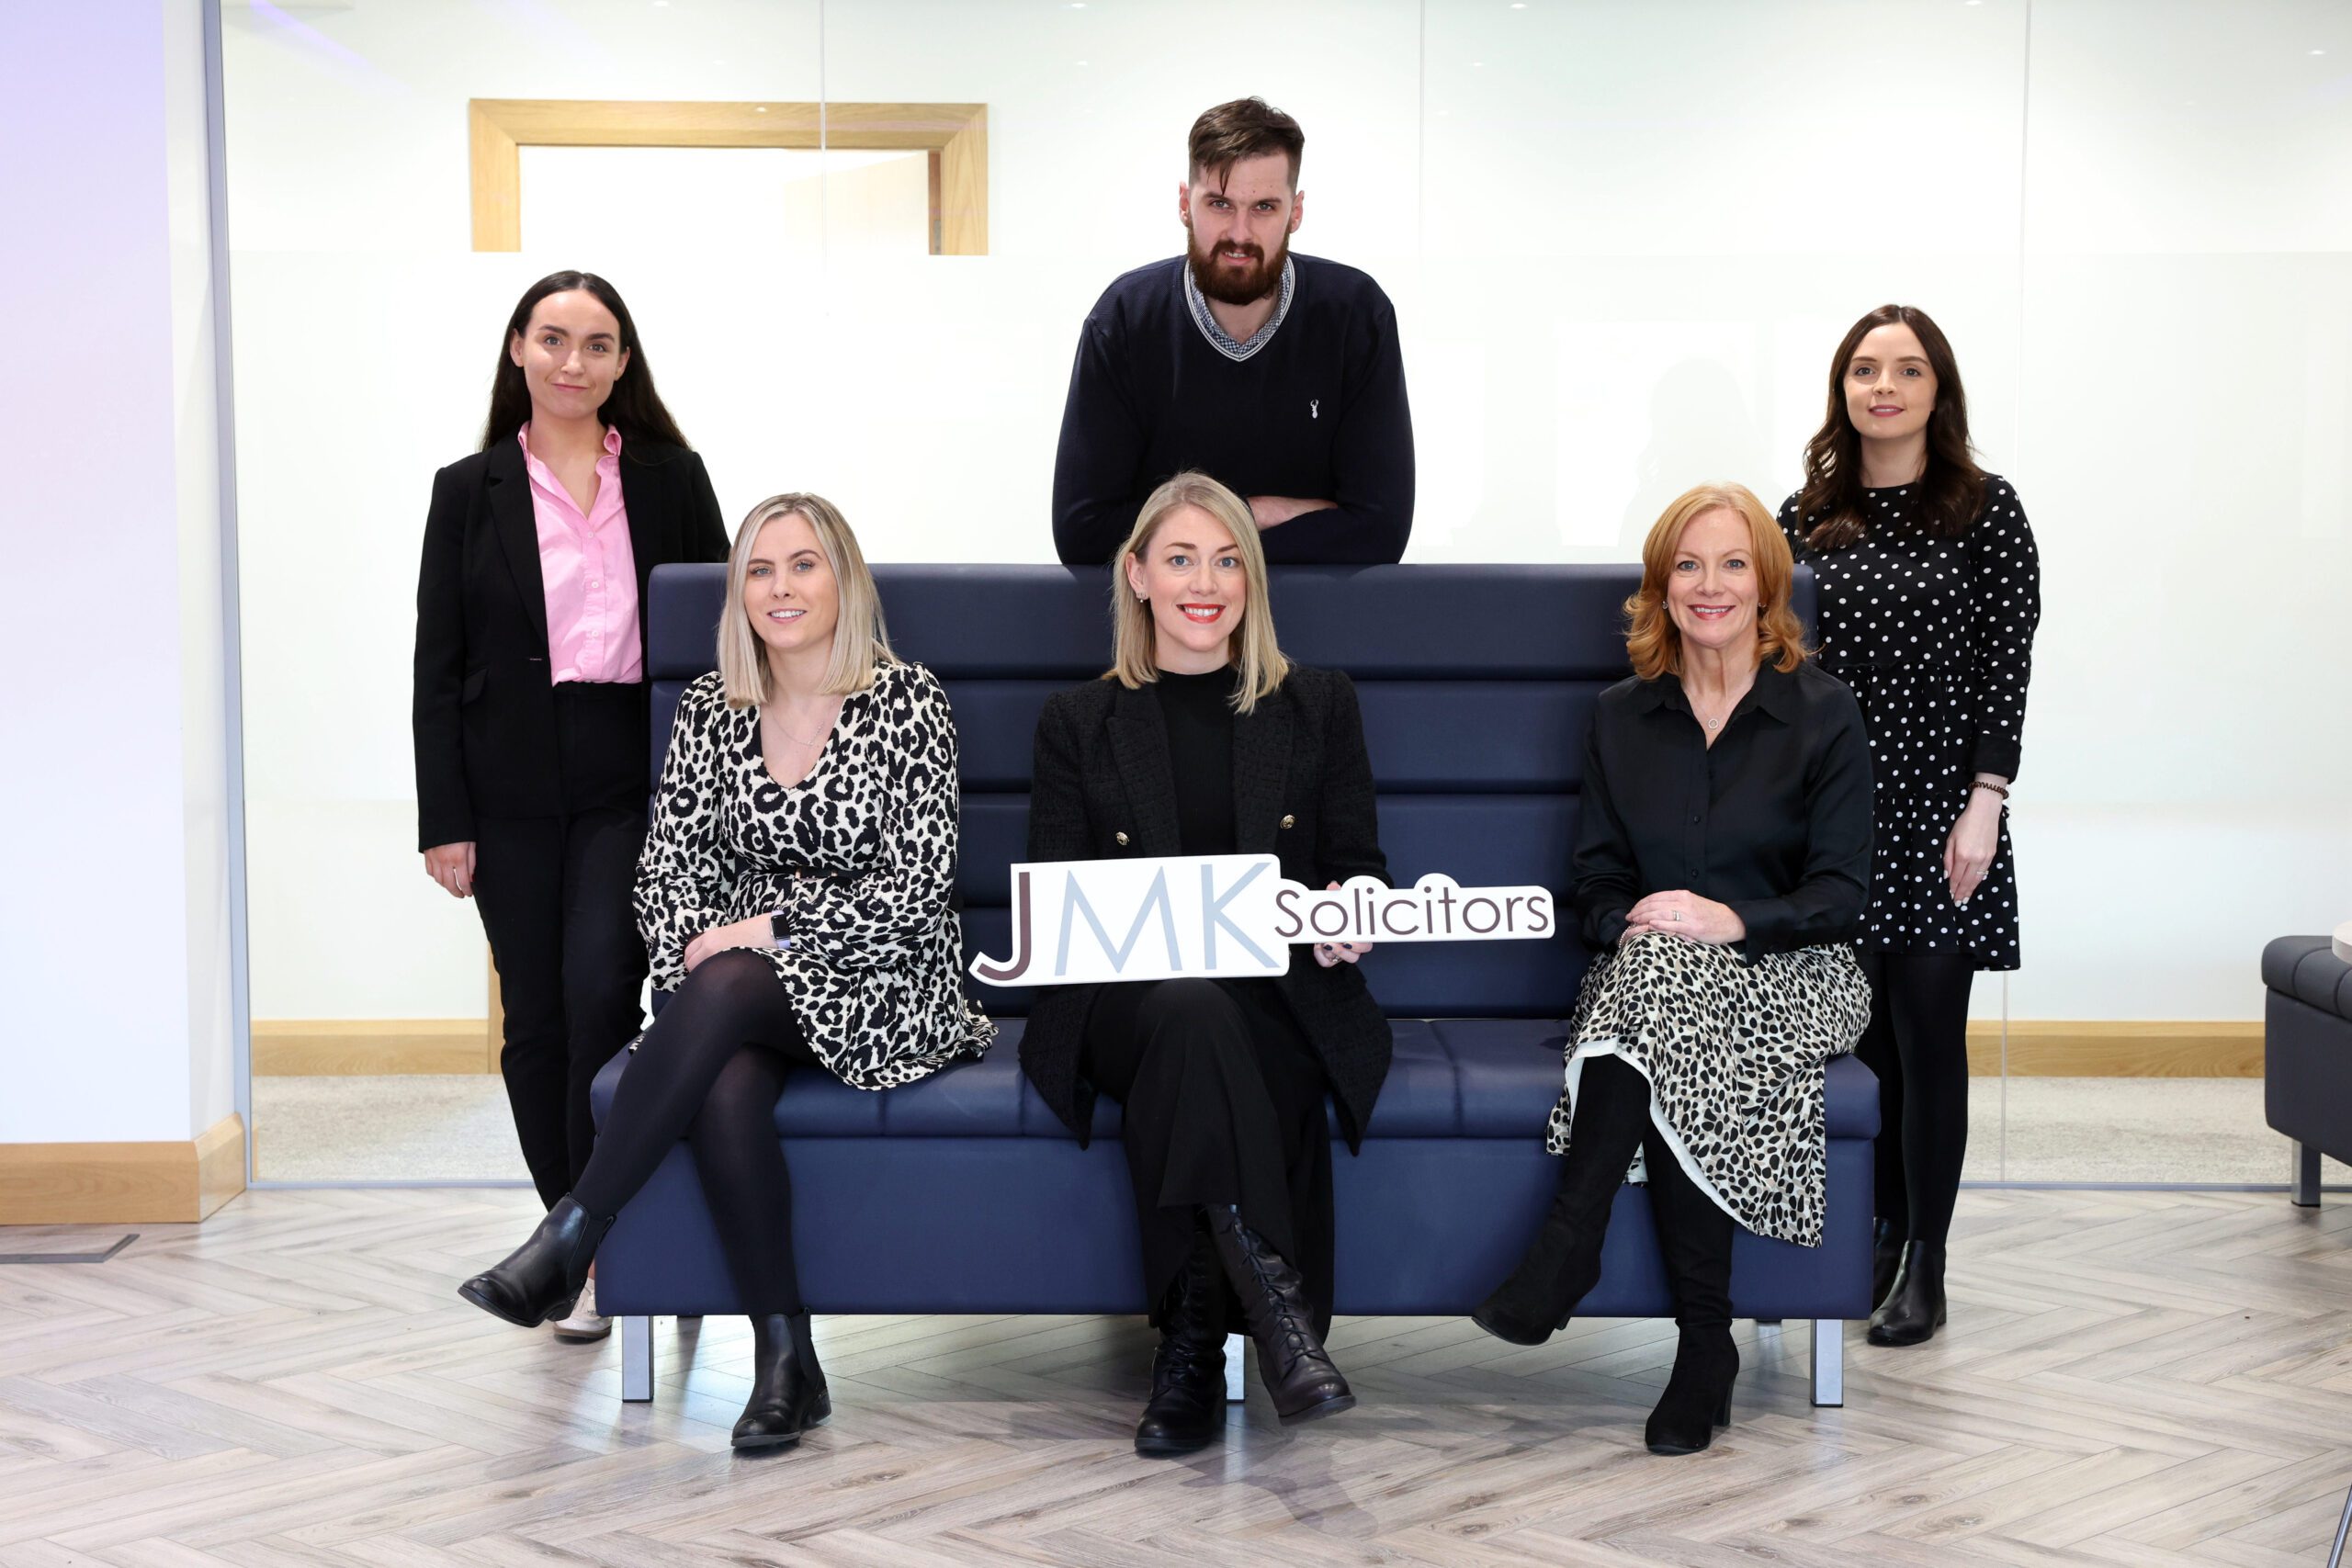 JMK Solicitors continue national expansion with 20% more staff and new office